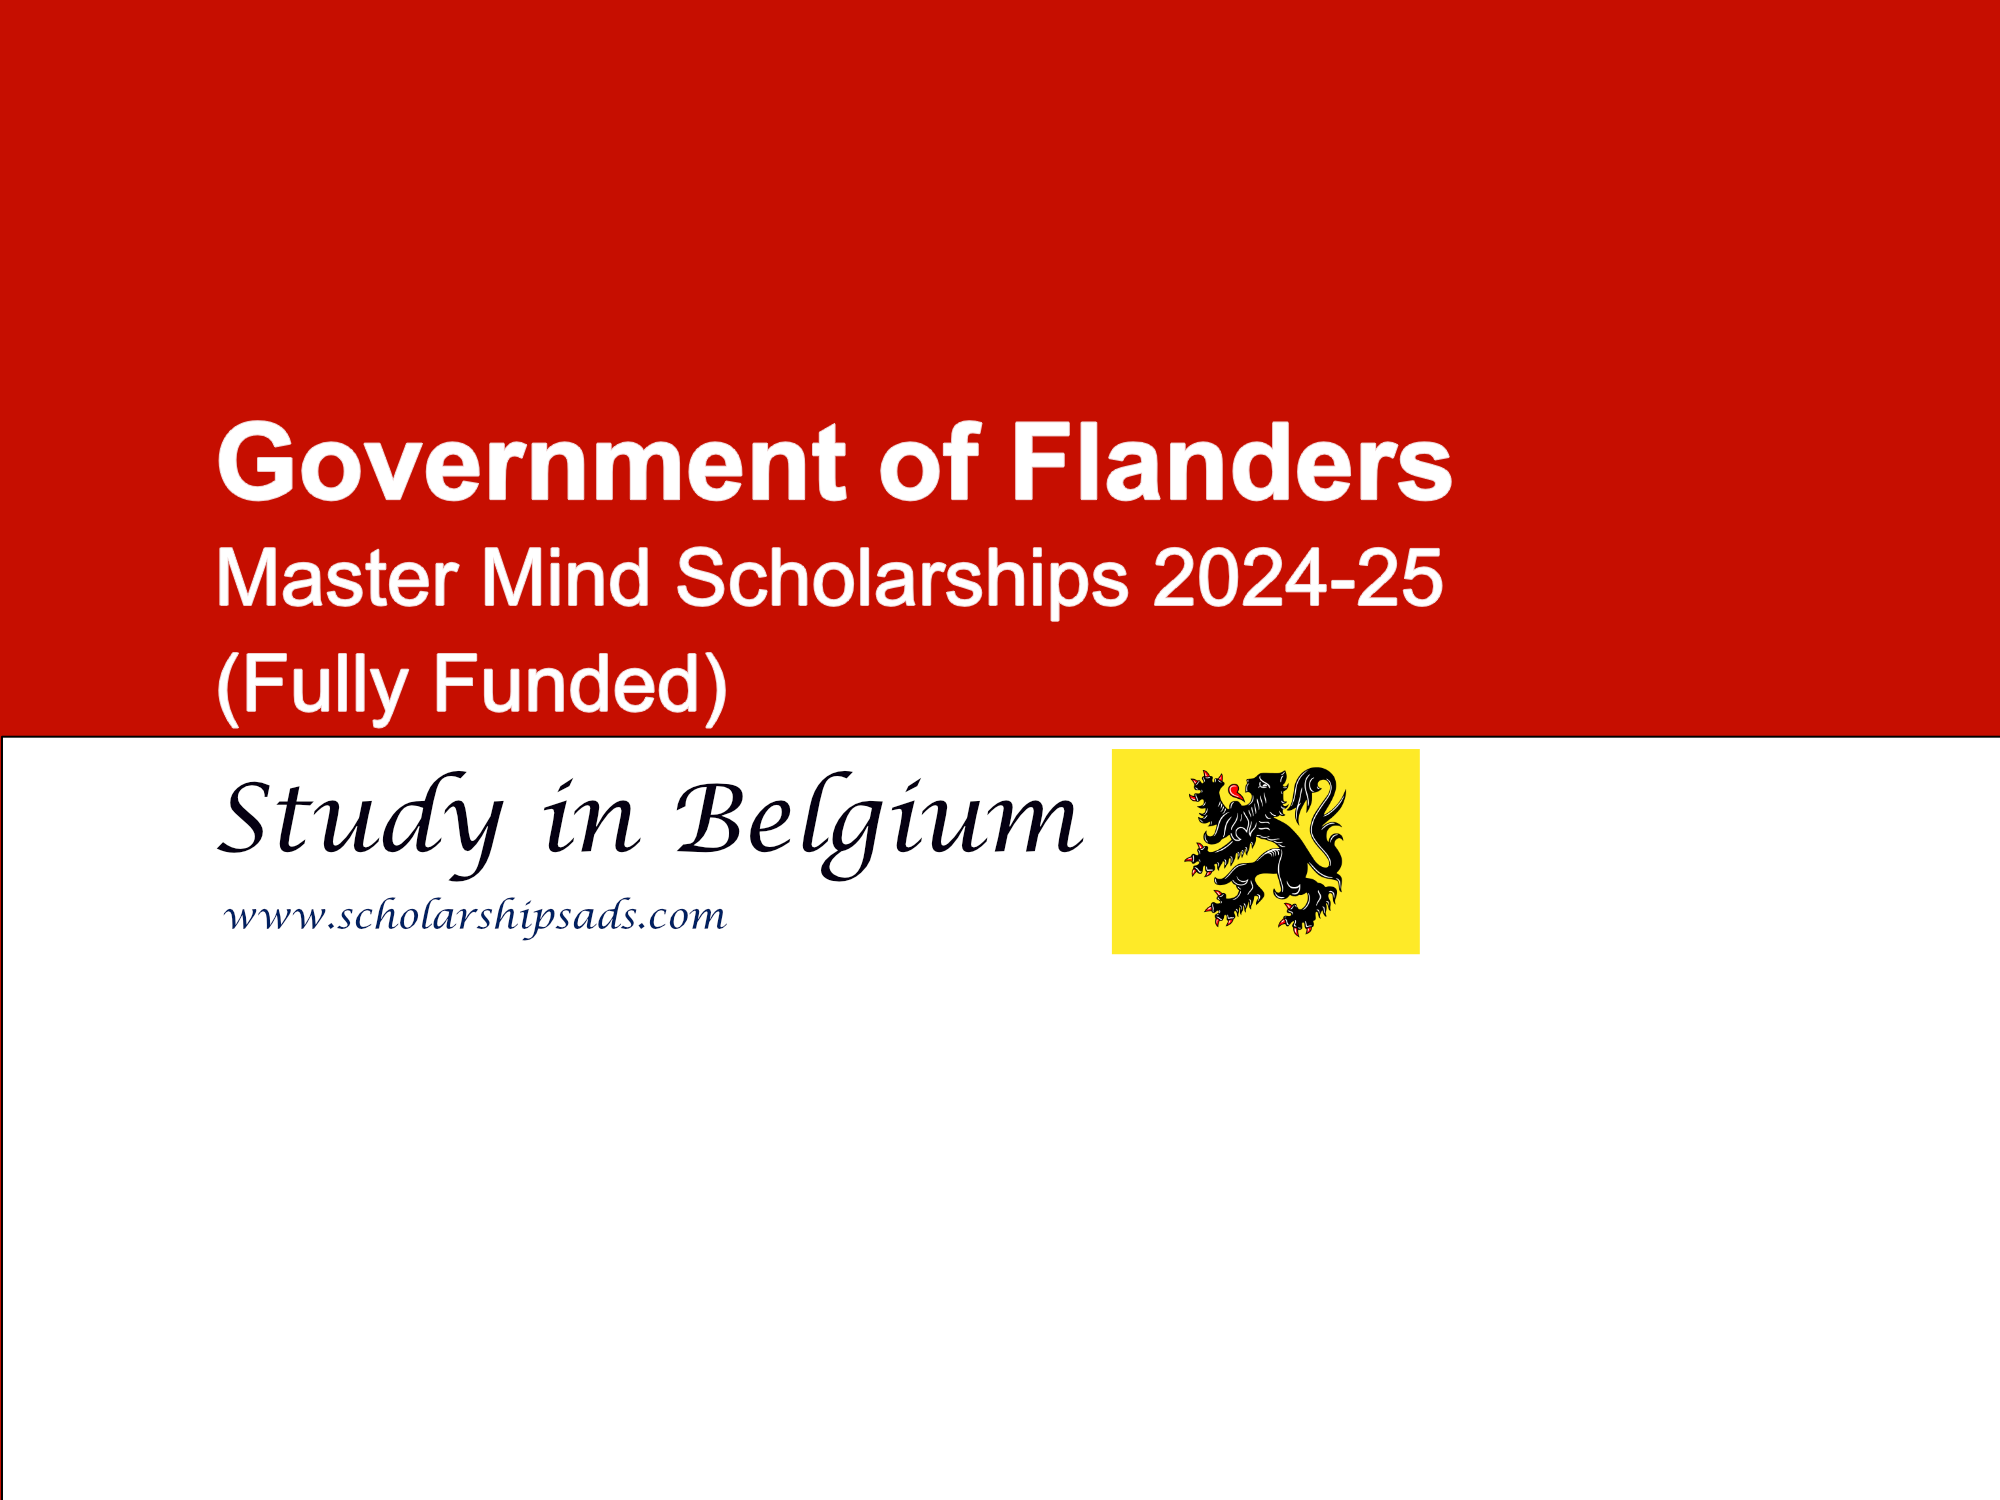  Government of Flanders Master Mind Scholarships. 